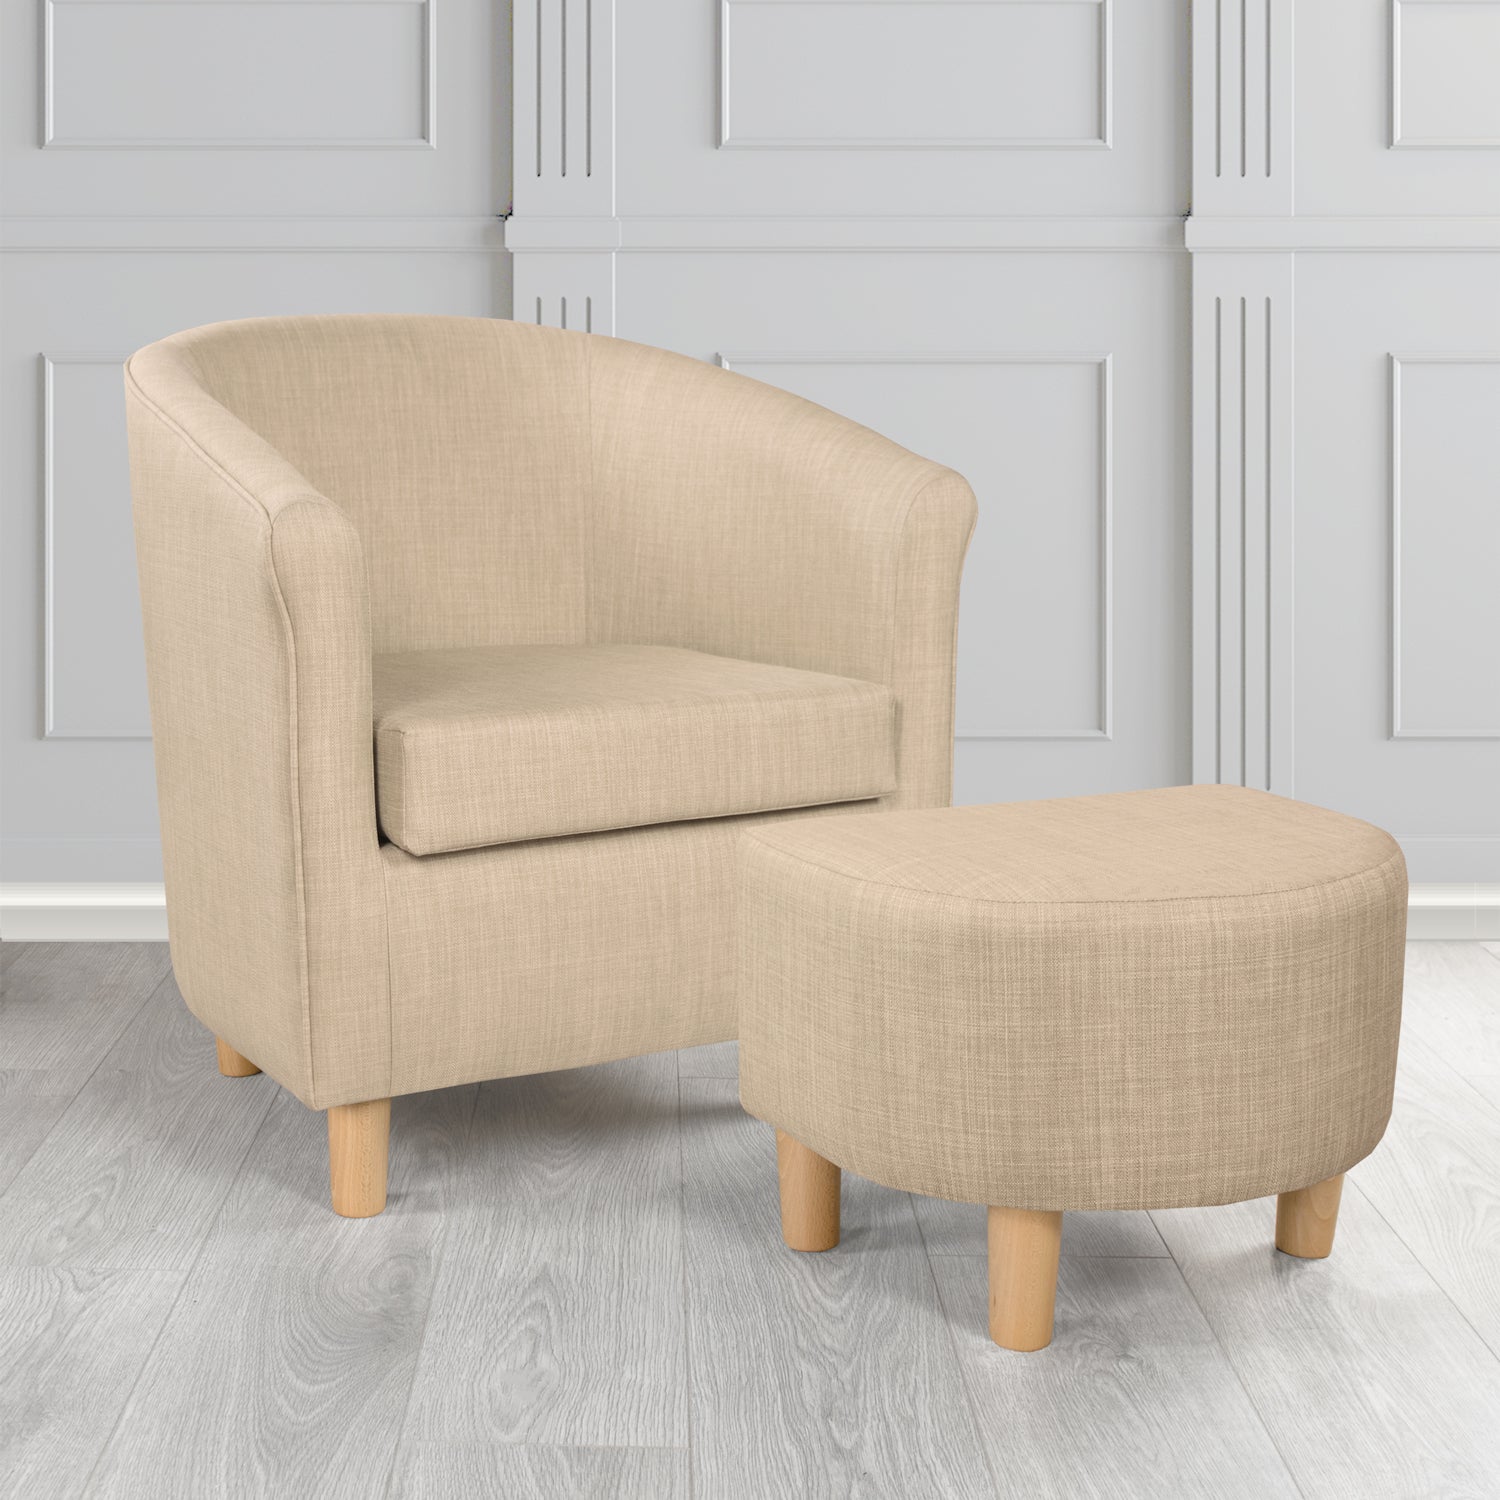 Tuscany Charles Sand Linen Plain Fabric Tub Chair with Dee Footstool Set - The Tub Chair Shop